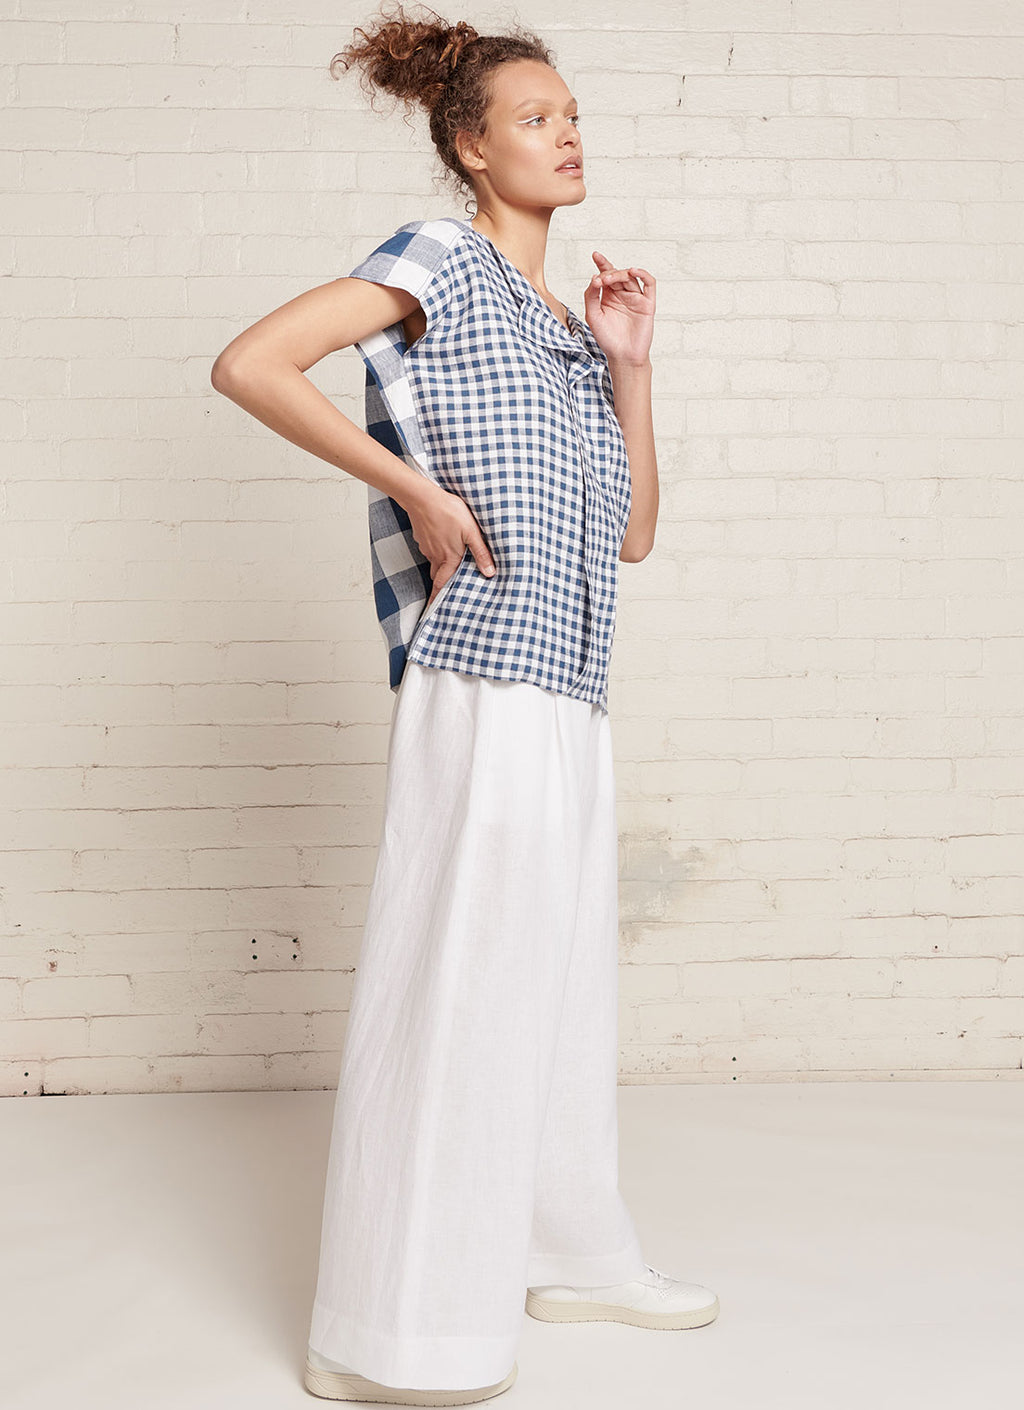 An indigo and white gingham, square cut linen top with short sleeves, open V neckline and centre front pleat detail made from mixed gingham yarn dye washed linen